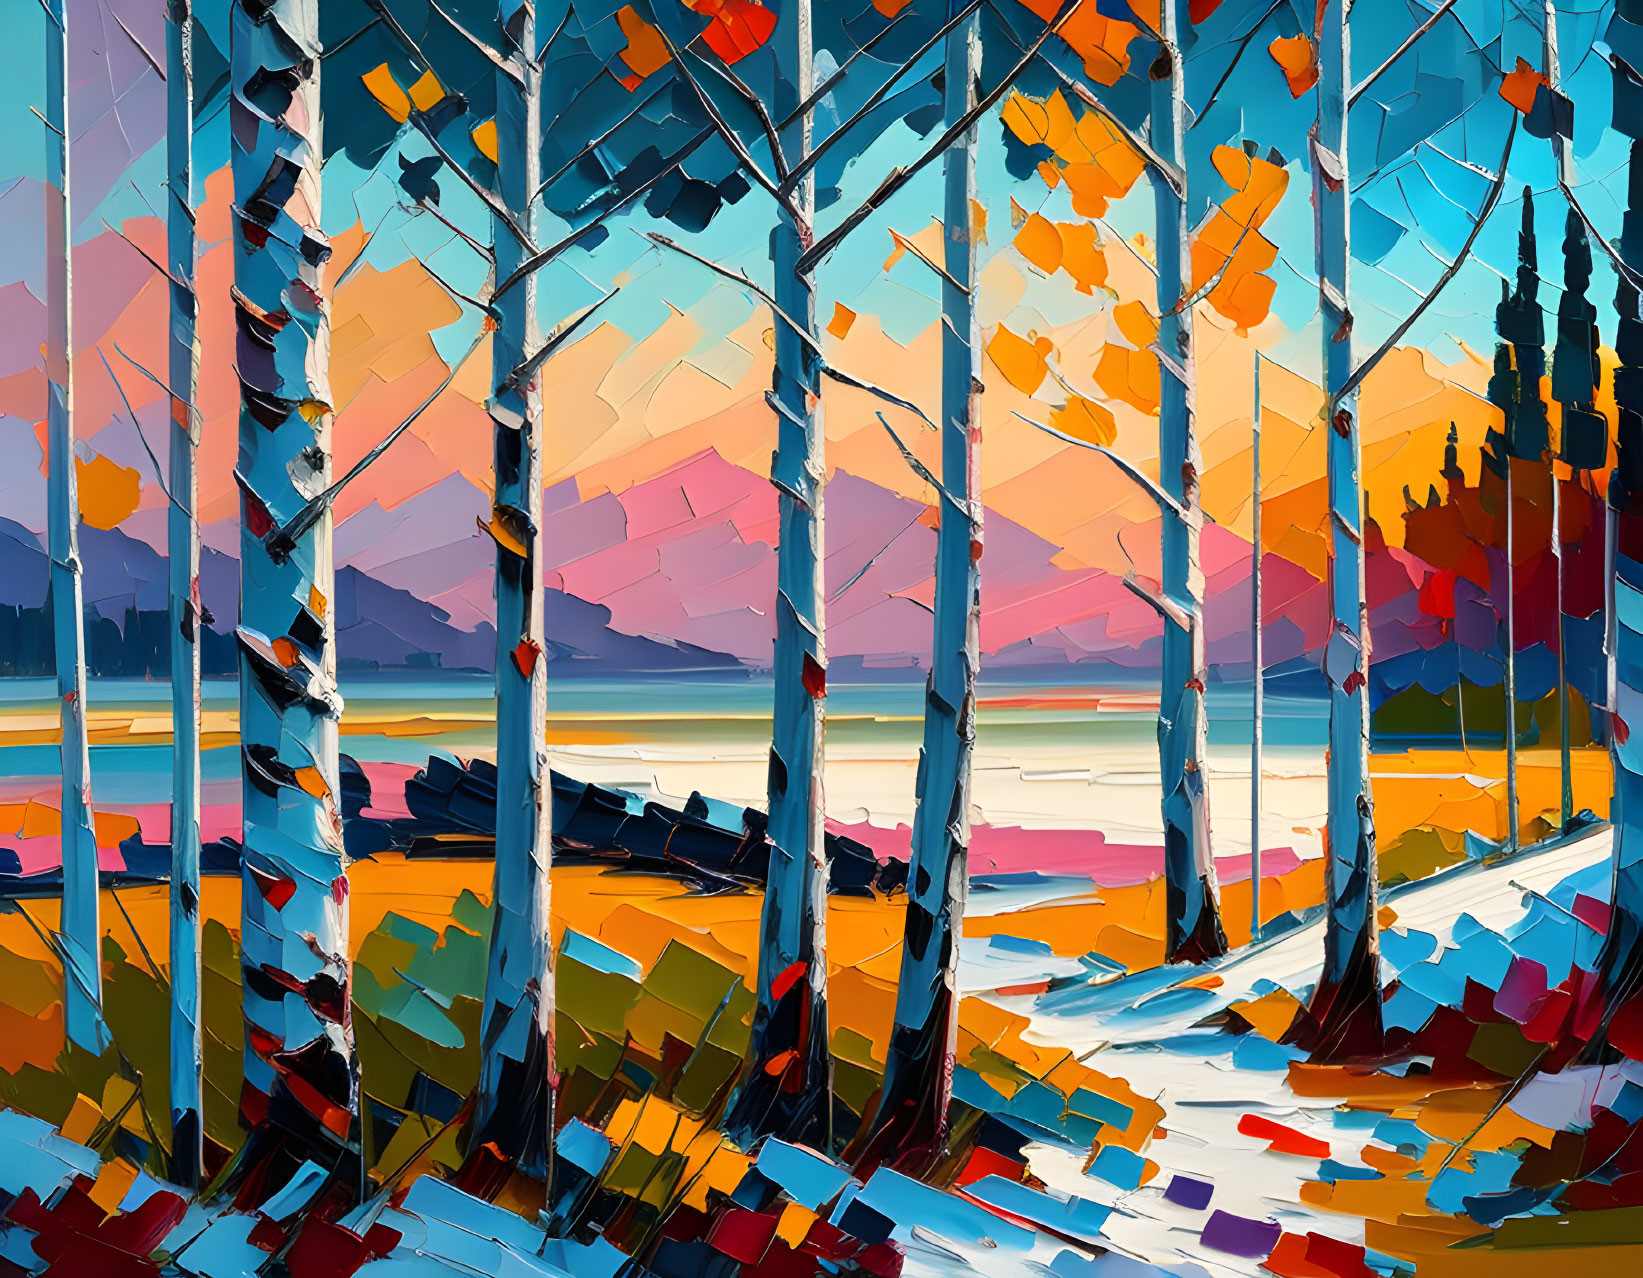 Abstract forest painting with slender trees, autumn leaves, serene lake, and colorful sunset sky.